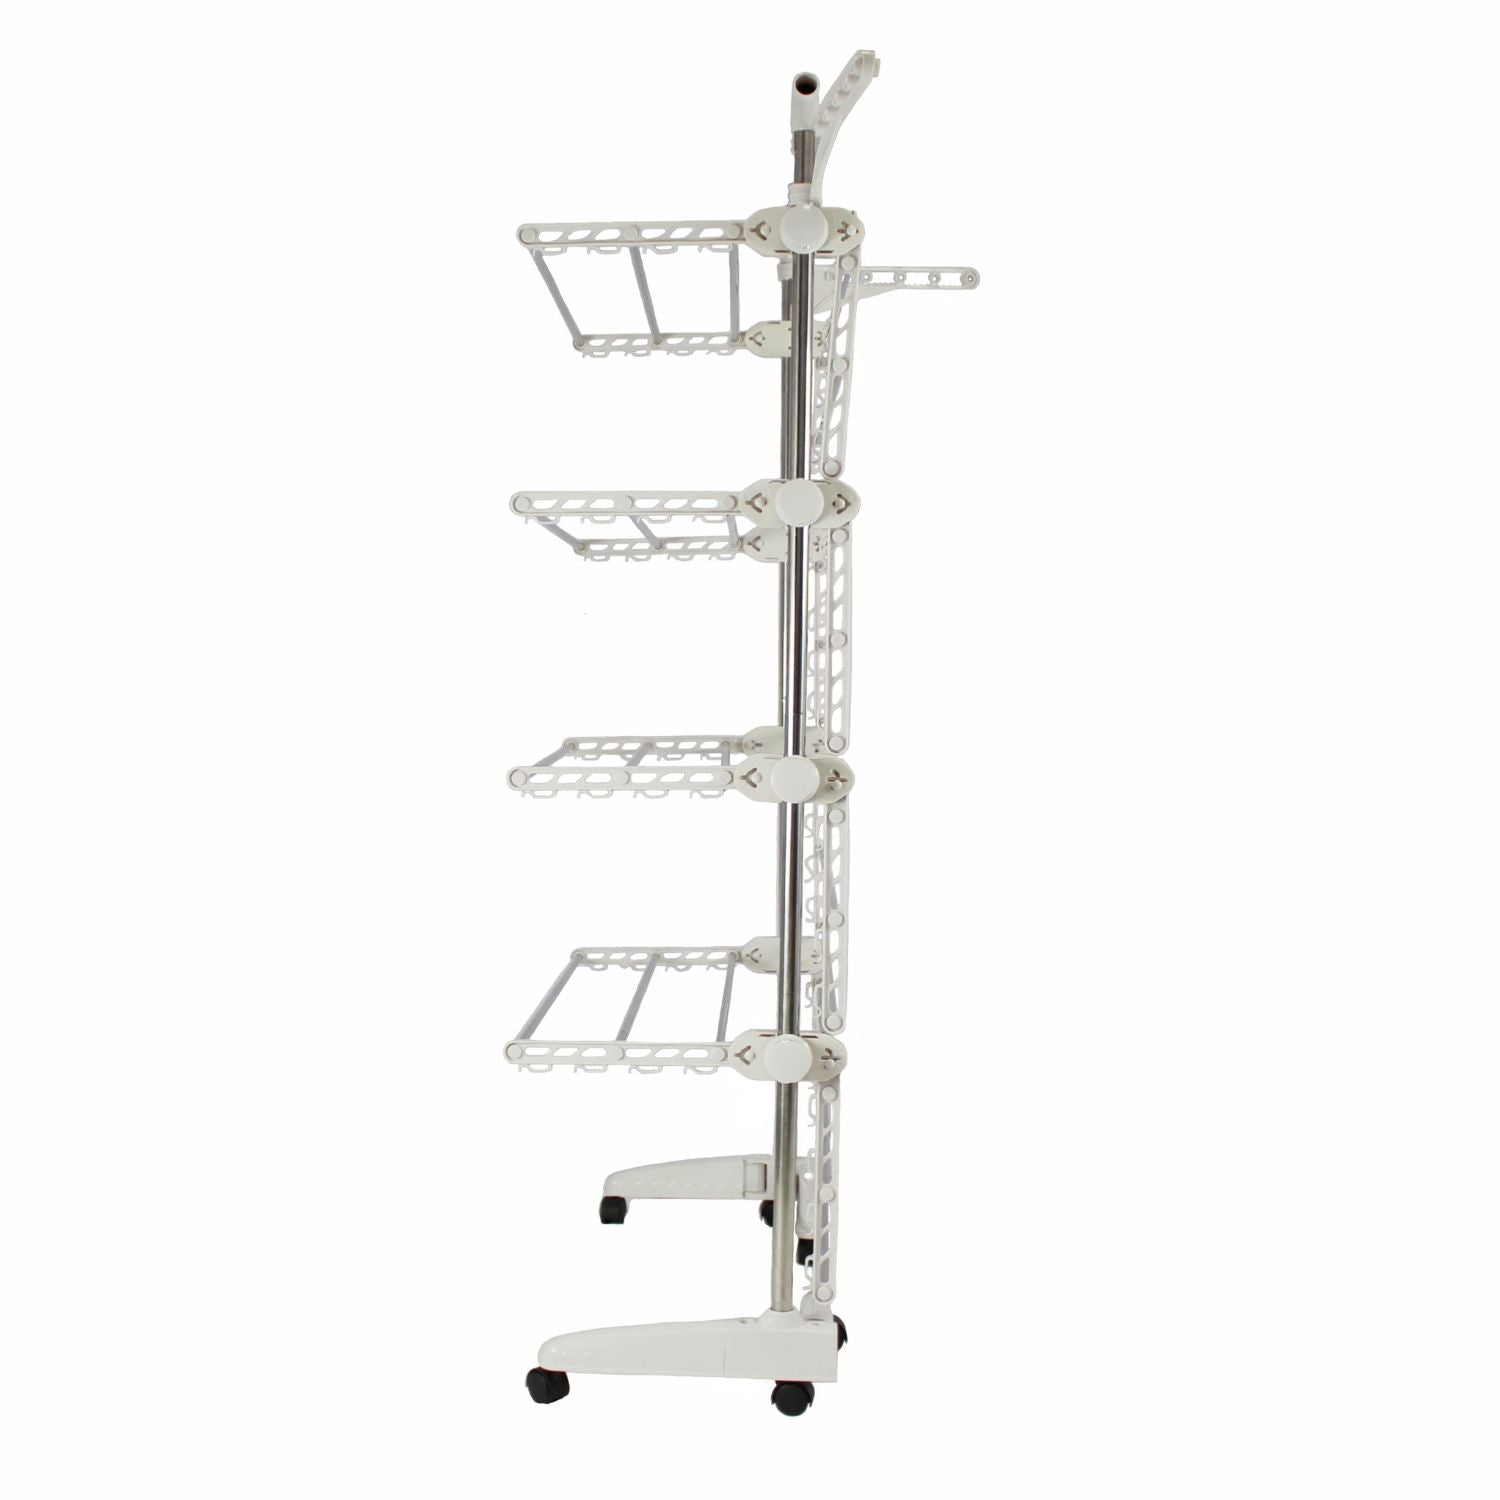 GOMINIMO Laundry Drying Rack 4 Tier (White) GO-LDR-101-JL - SILBERSHELL